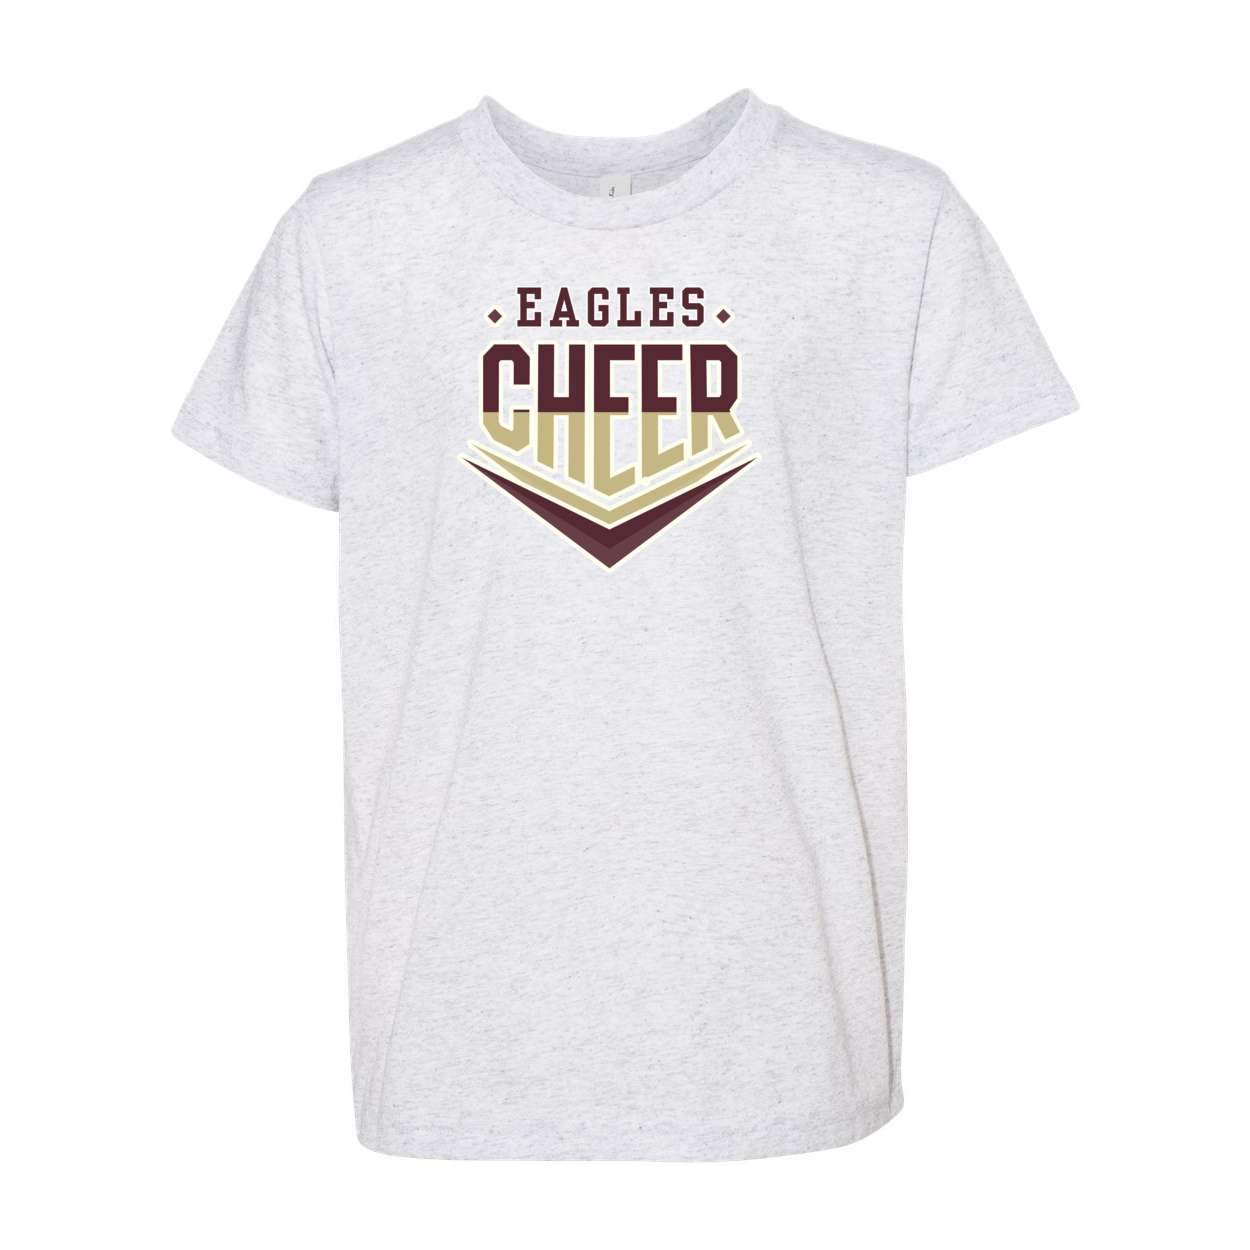 Youth Super Soft Eagles Maroon & Gold Cheer Short Sleeve Graphic Tee - New Albany Eagles